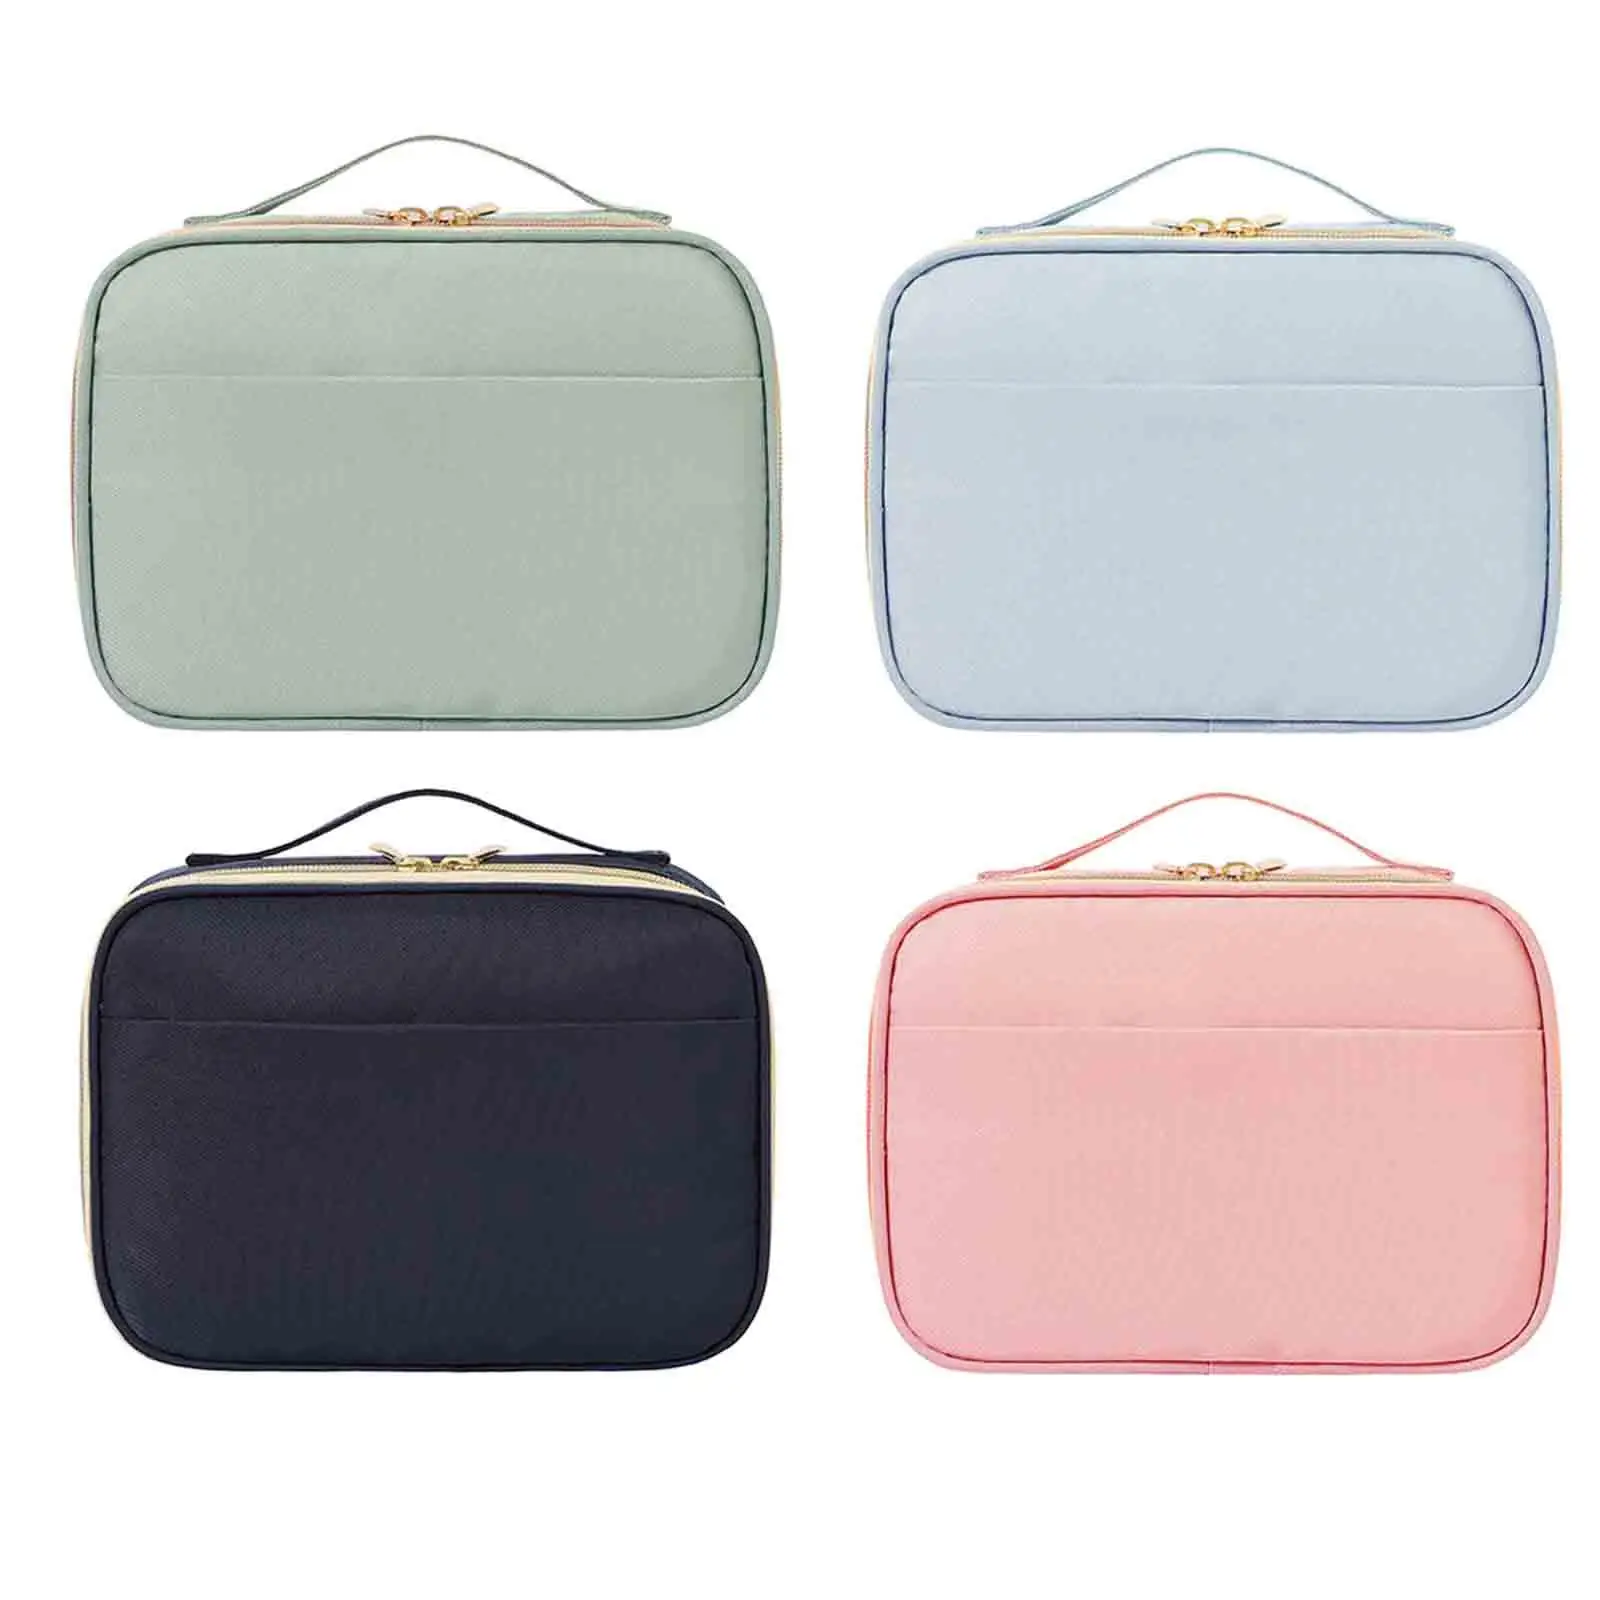 2 in 1 Makeup Bag Fashionable Zipper Pouch Foldable Home Use Container Waterproof Toiletry Bag Organizer for Toiletries Bathroom